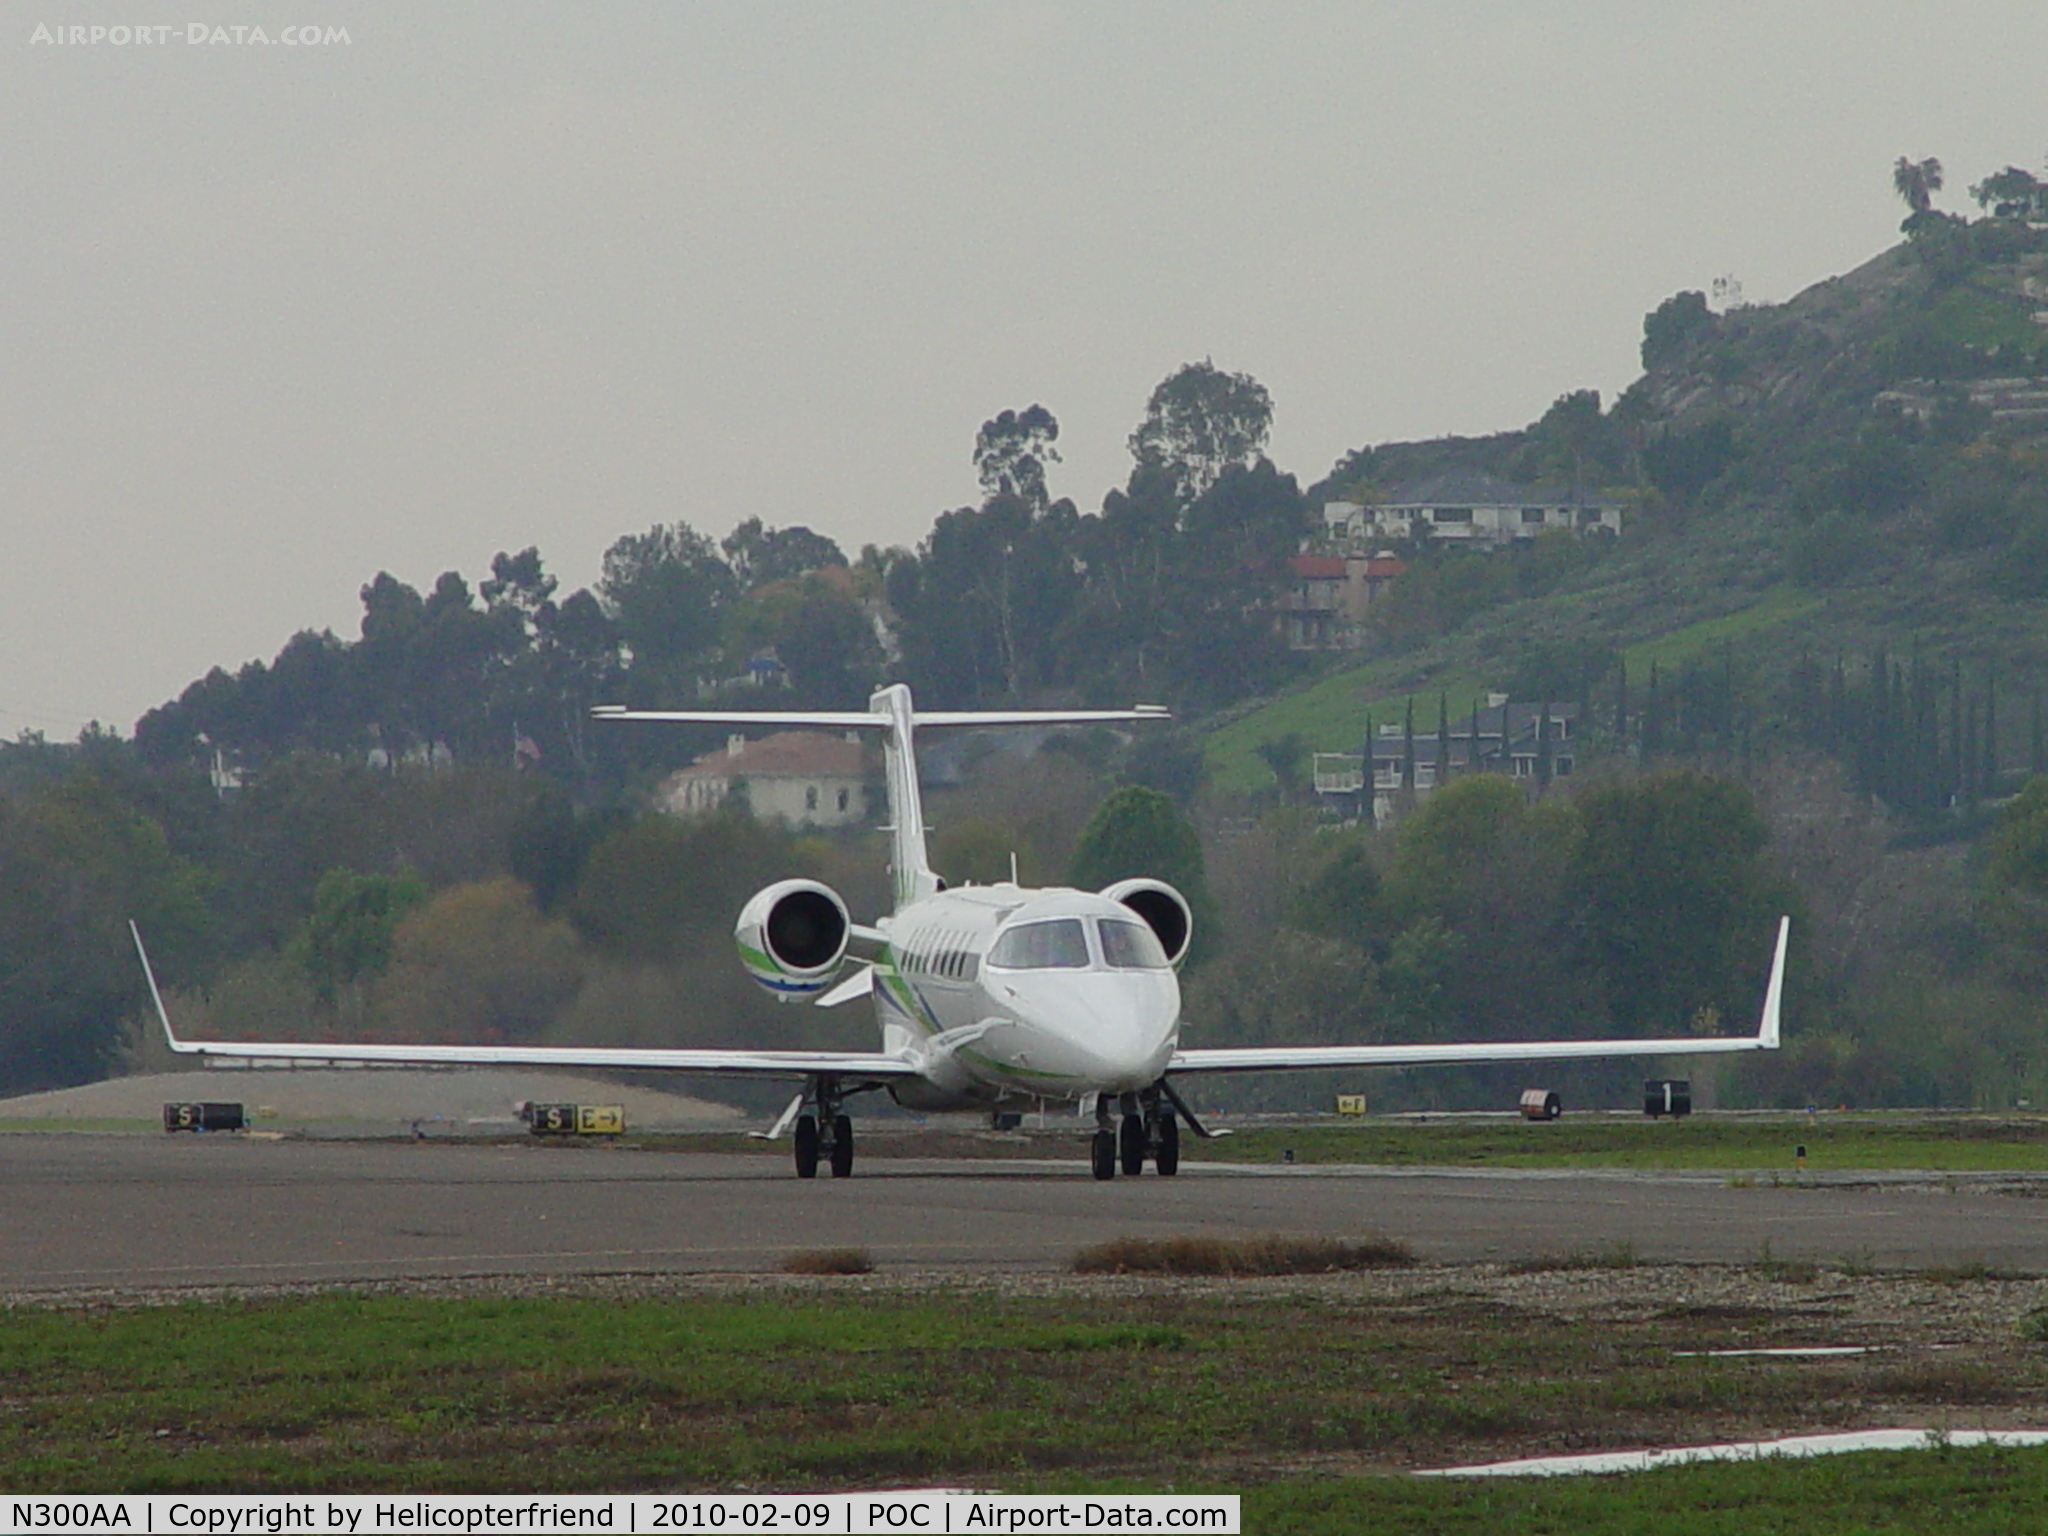 N300AA, 2005 Learjet 45 C/N 45-285, On the taxiway eastbound